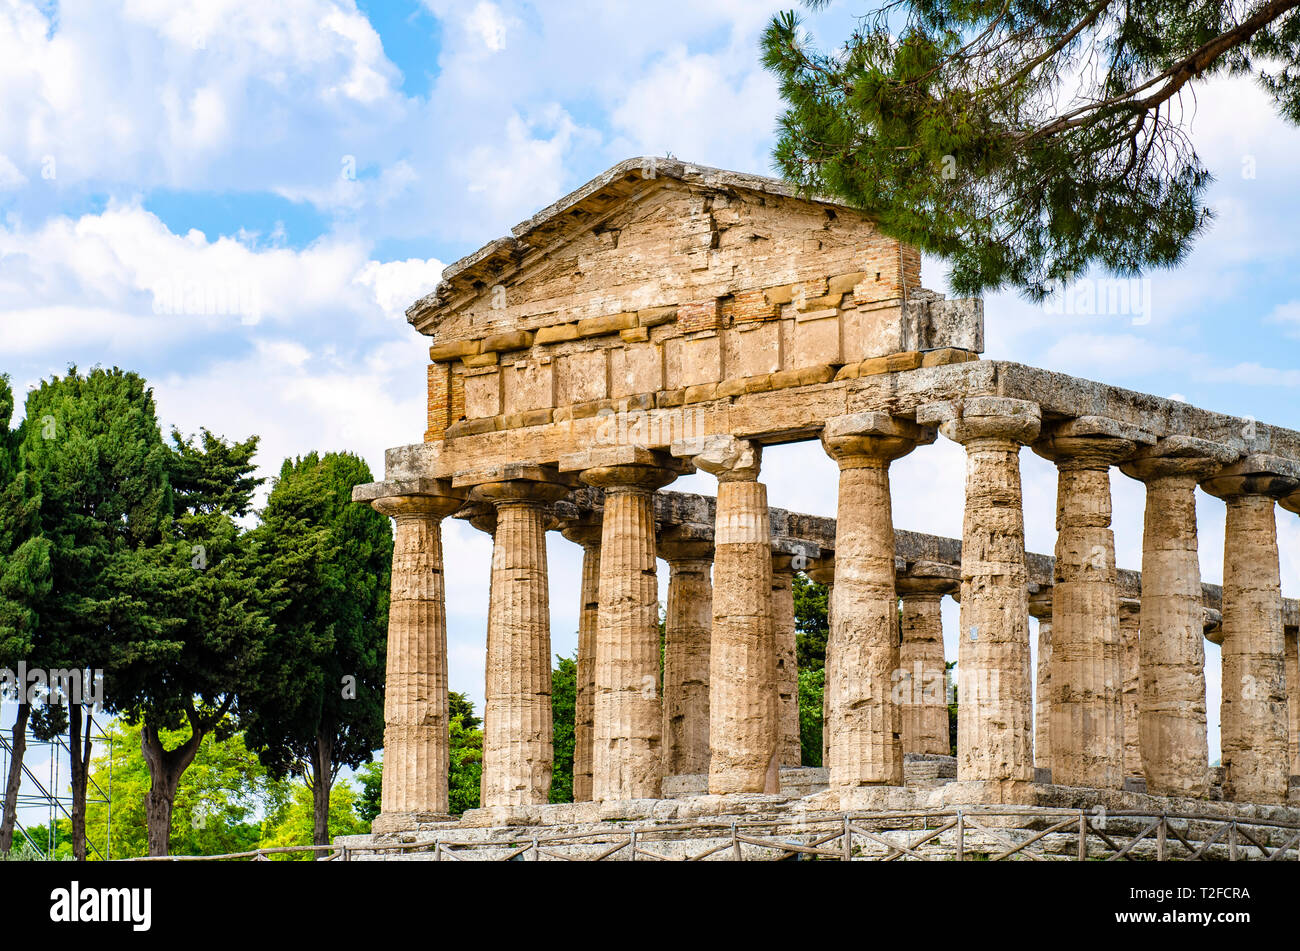 Temple of Athena at Paestum was an ancient Greek city in Magna Graecia, southern Italy. Stock Photo